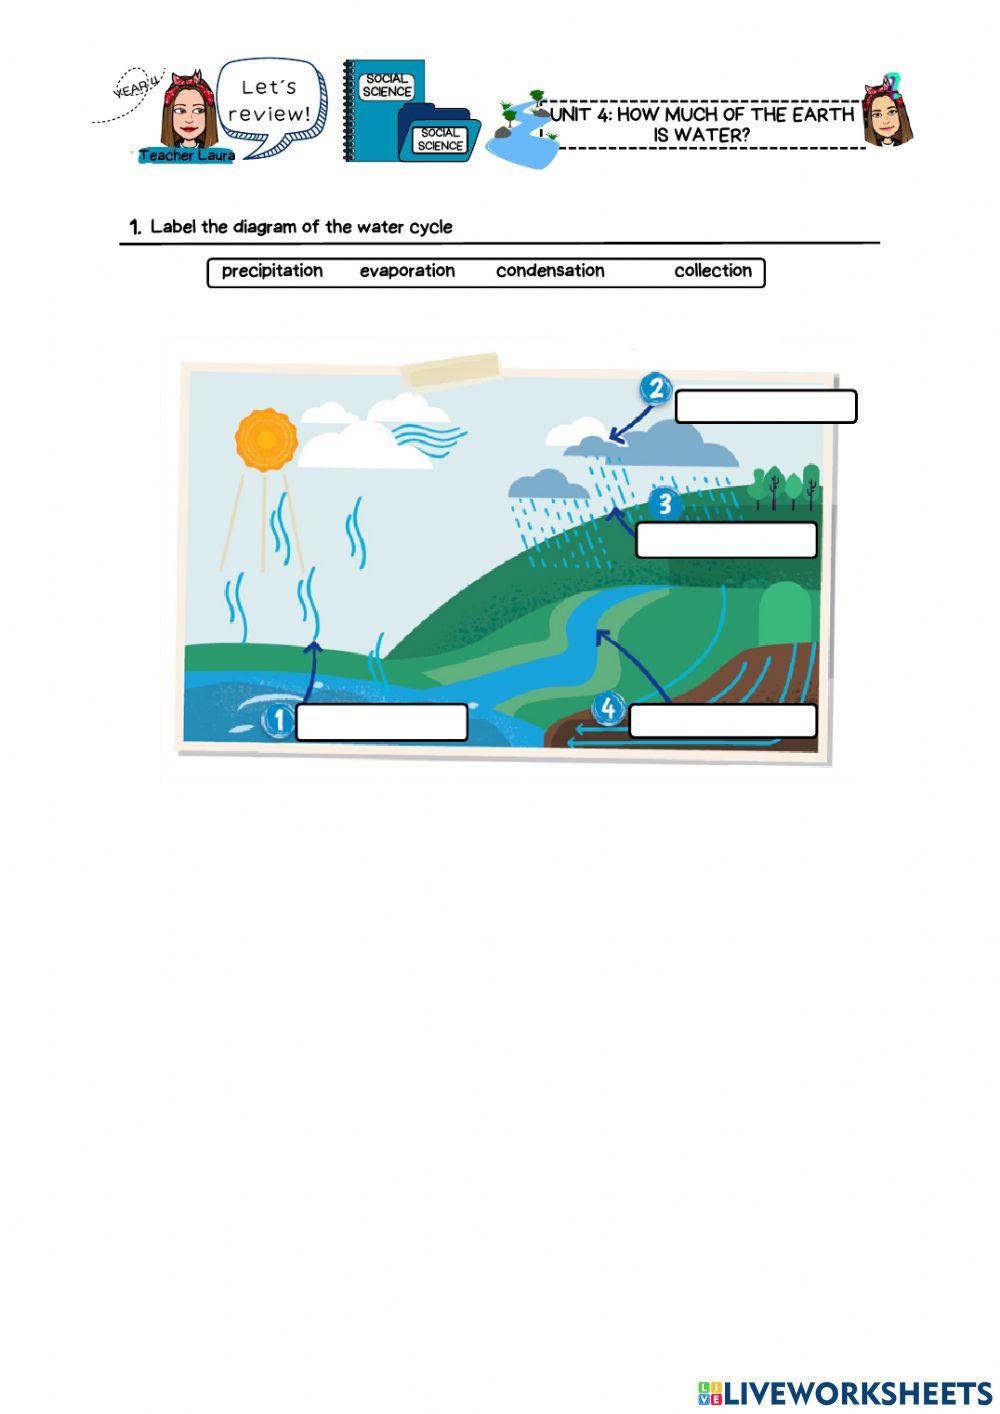 Unit 4: How much of the Earth is water?